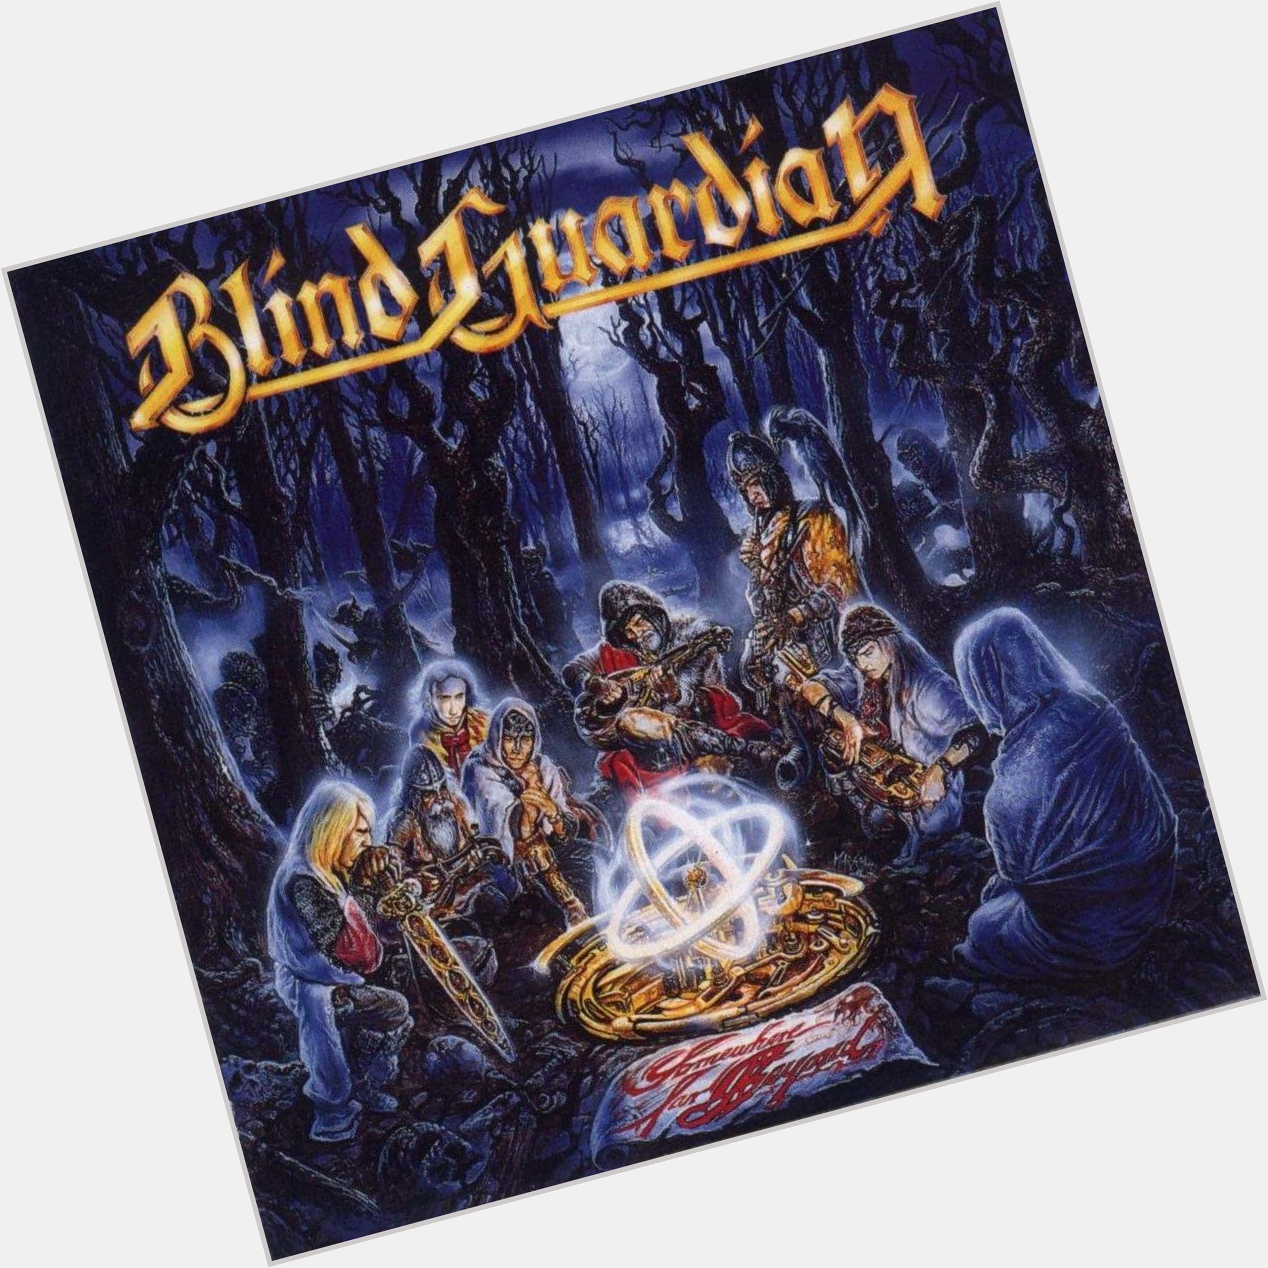  Time What Is Time
from Somewhere Far Beyond
by Blind Guardian

Happy Birthday, Marcus Siepen 